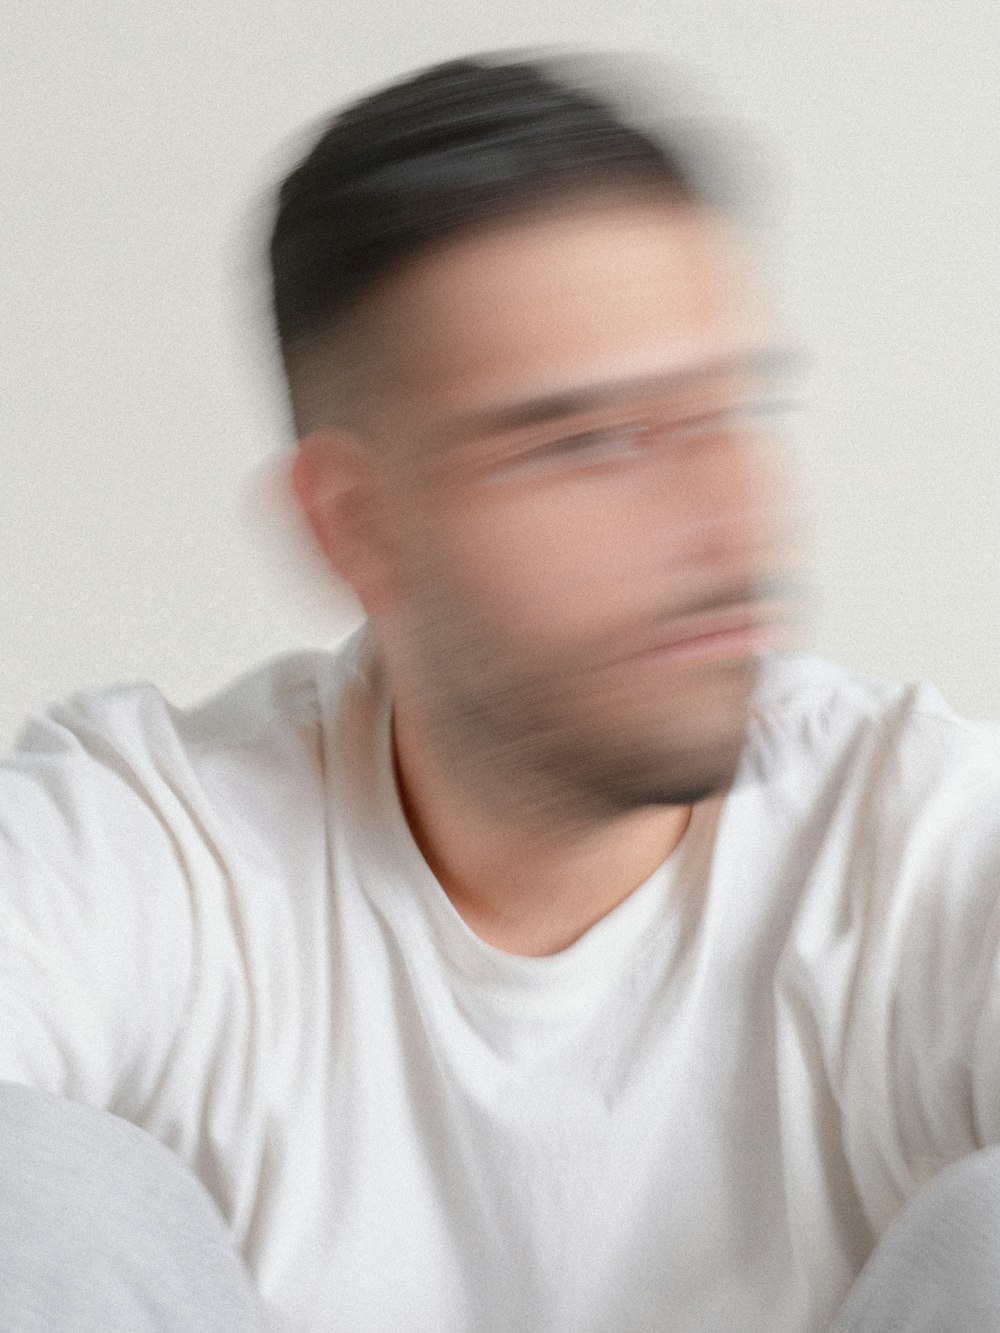 a blurry image of a man in a white shirt